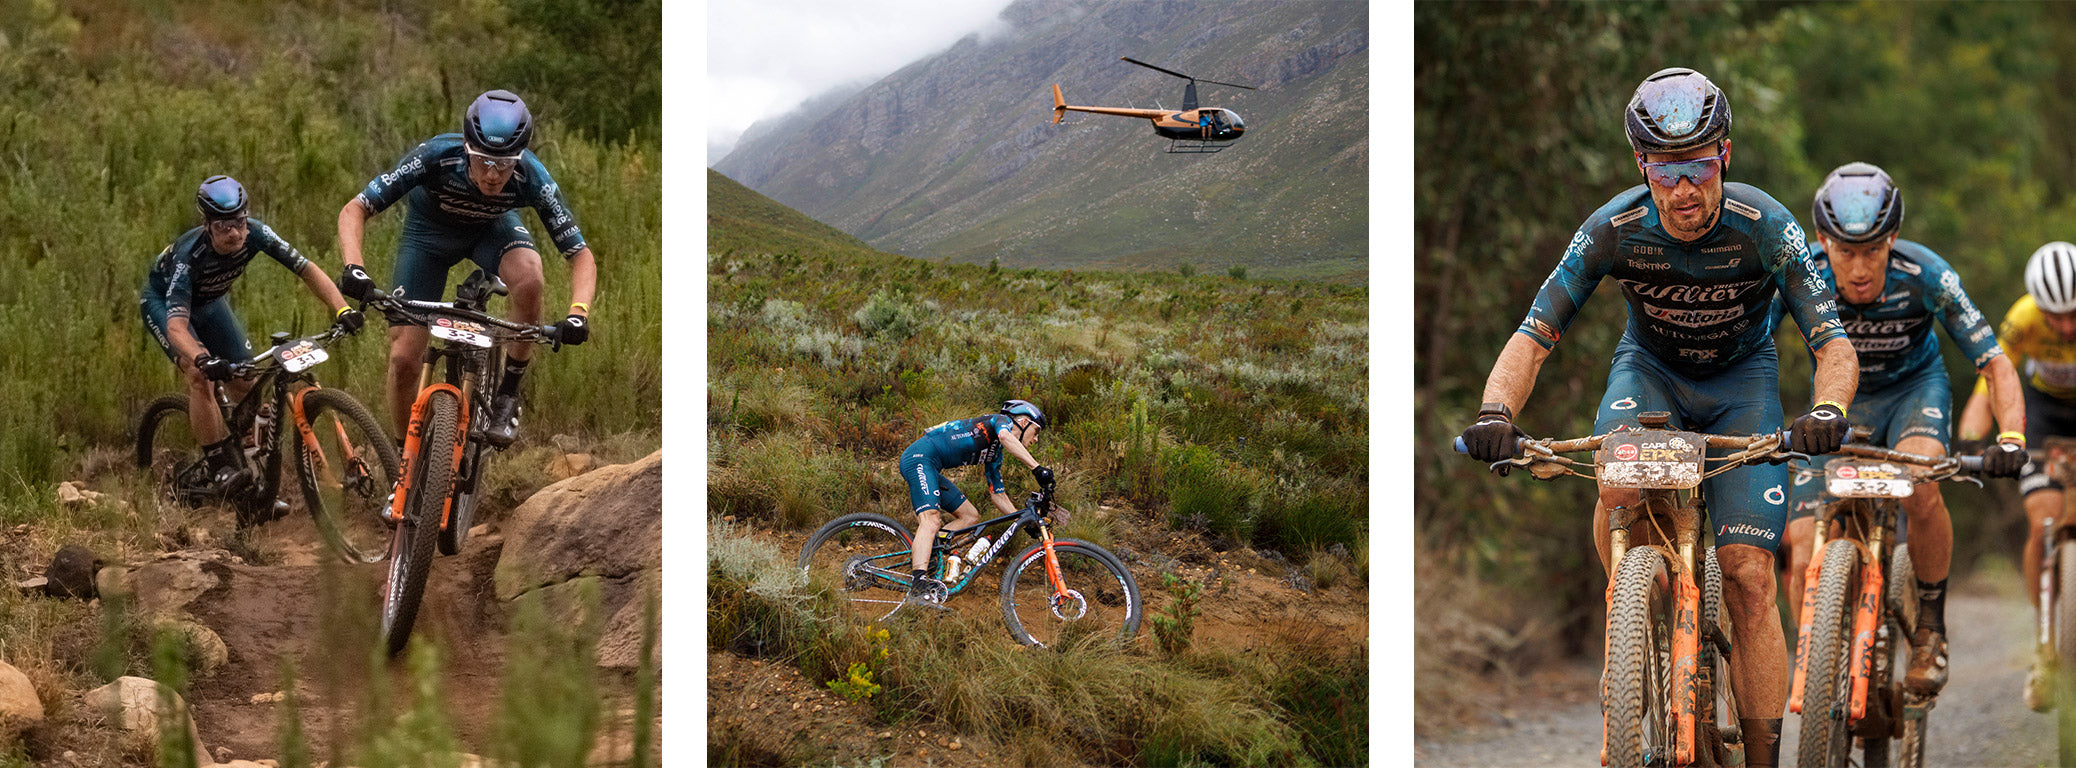 Images of Samu and Fabien riding on different stages of the Cape Epic